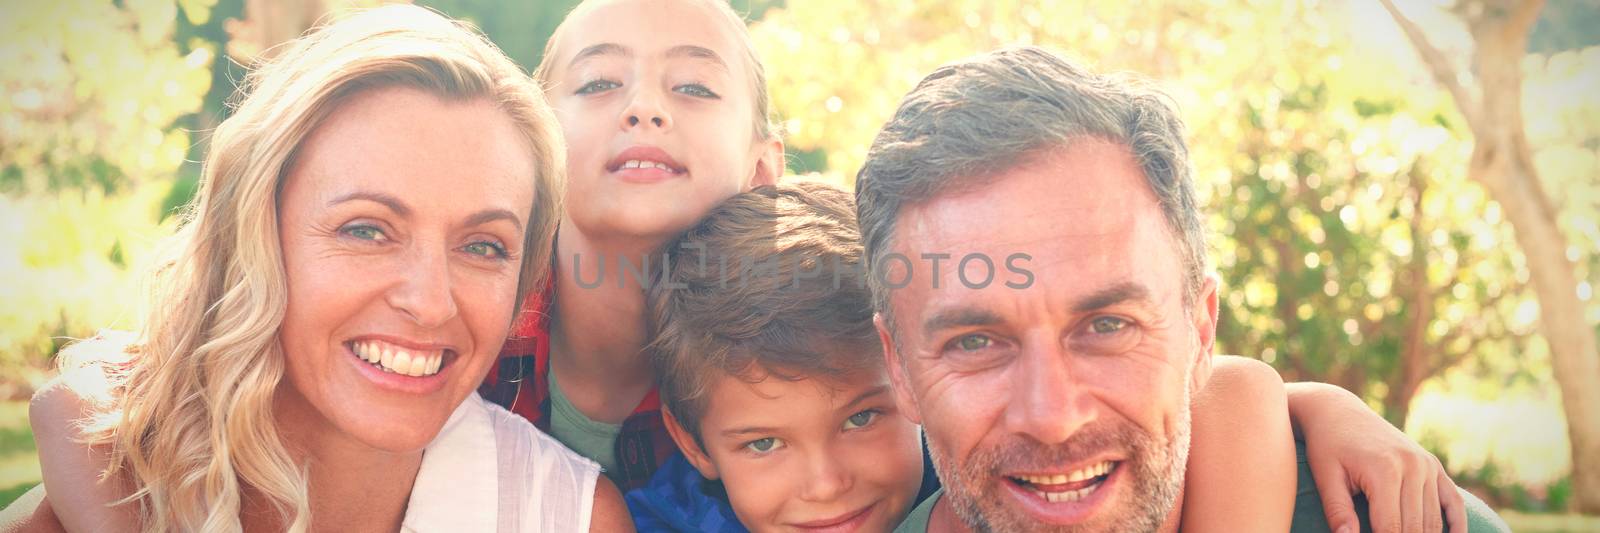 Portrait of happy family in park on a sunny day